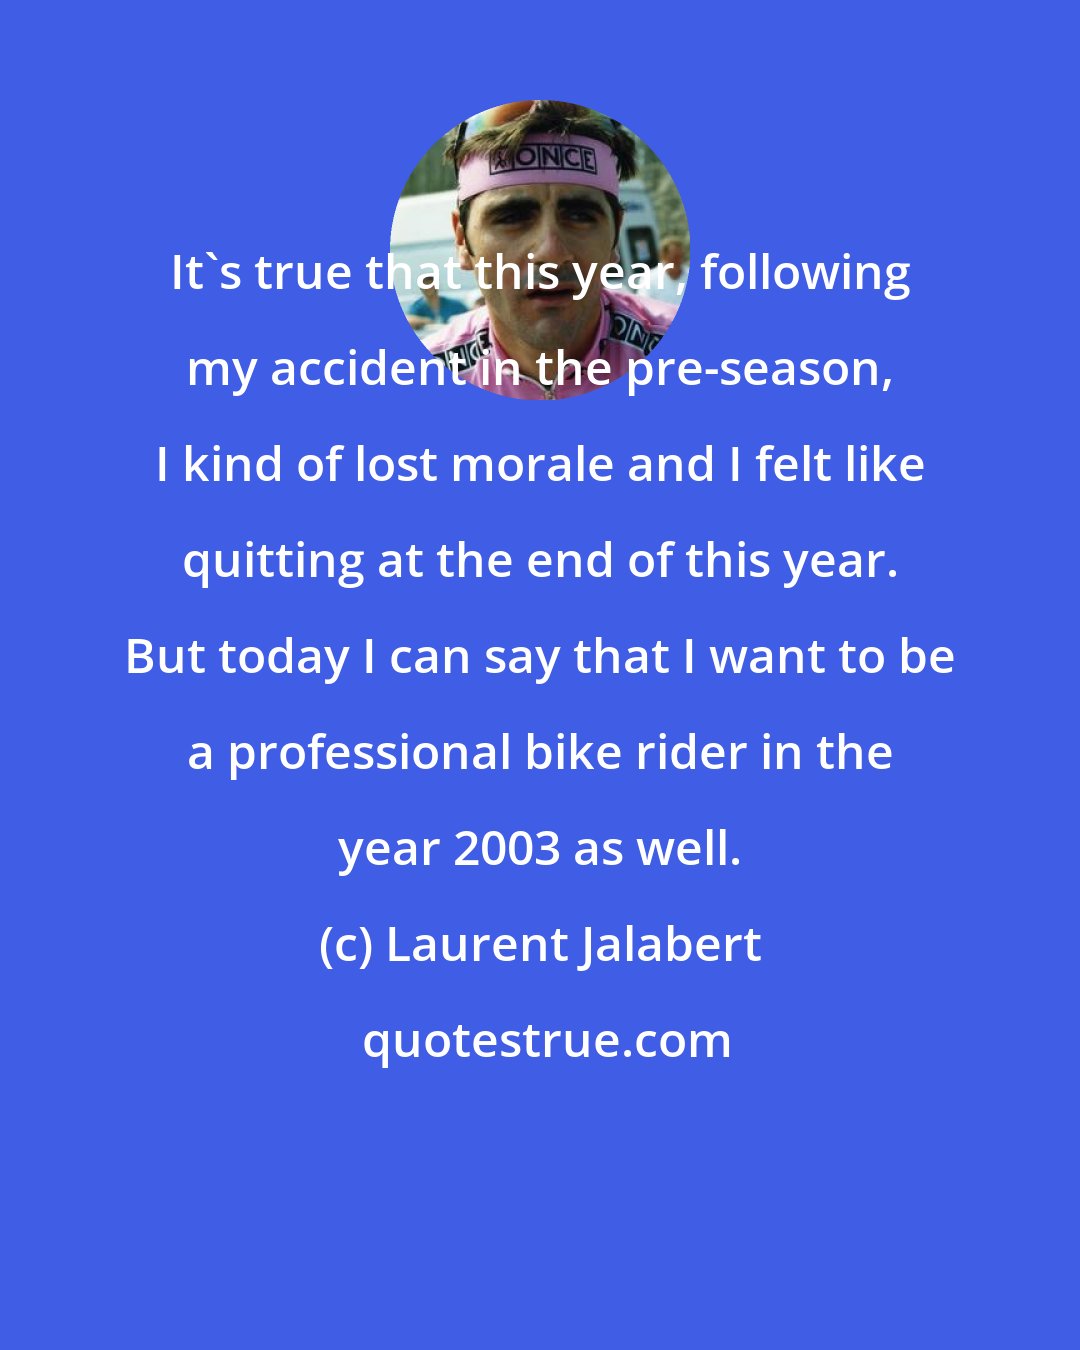 Laurent Jalabert: It's true that this year, following my accident in the pre-season, I kind of lost morale and I felt like quitting at the end of this year. But today I can say that I want to be a professional bike rider in the year 2003 as well.